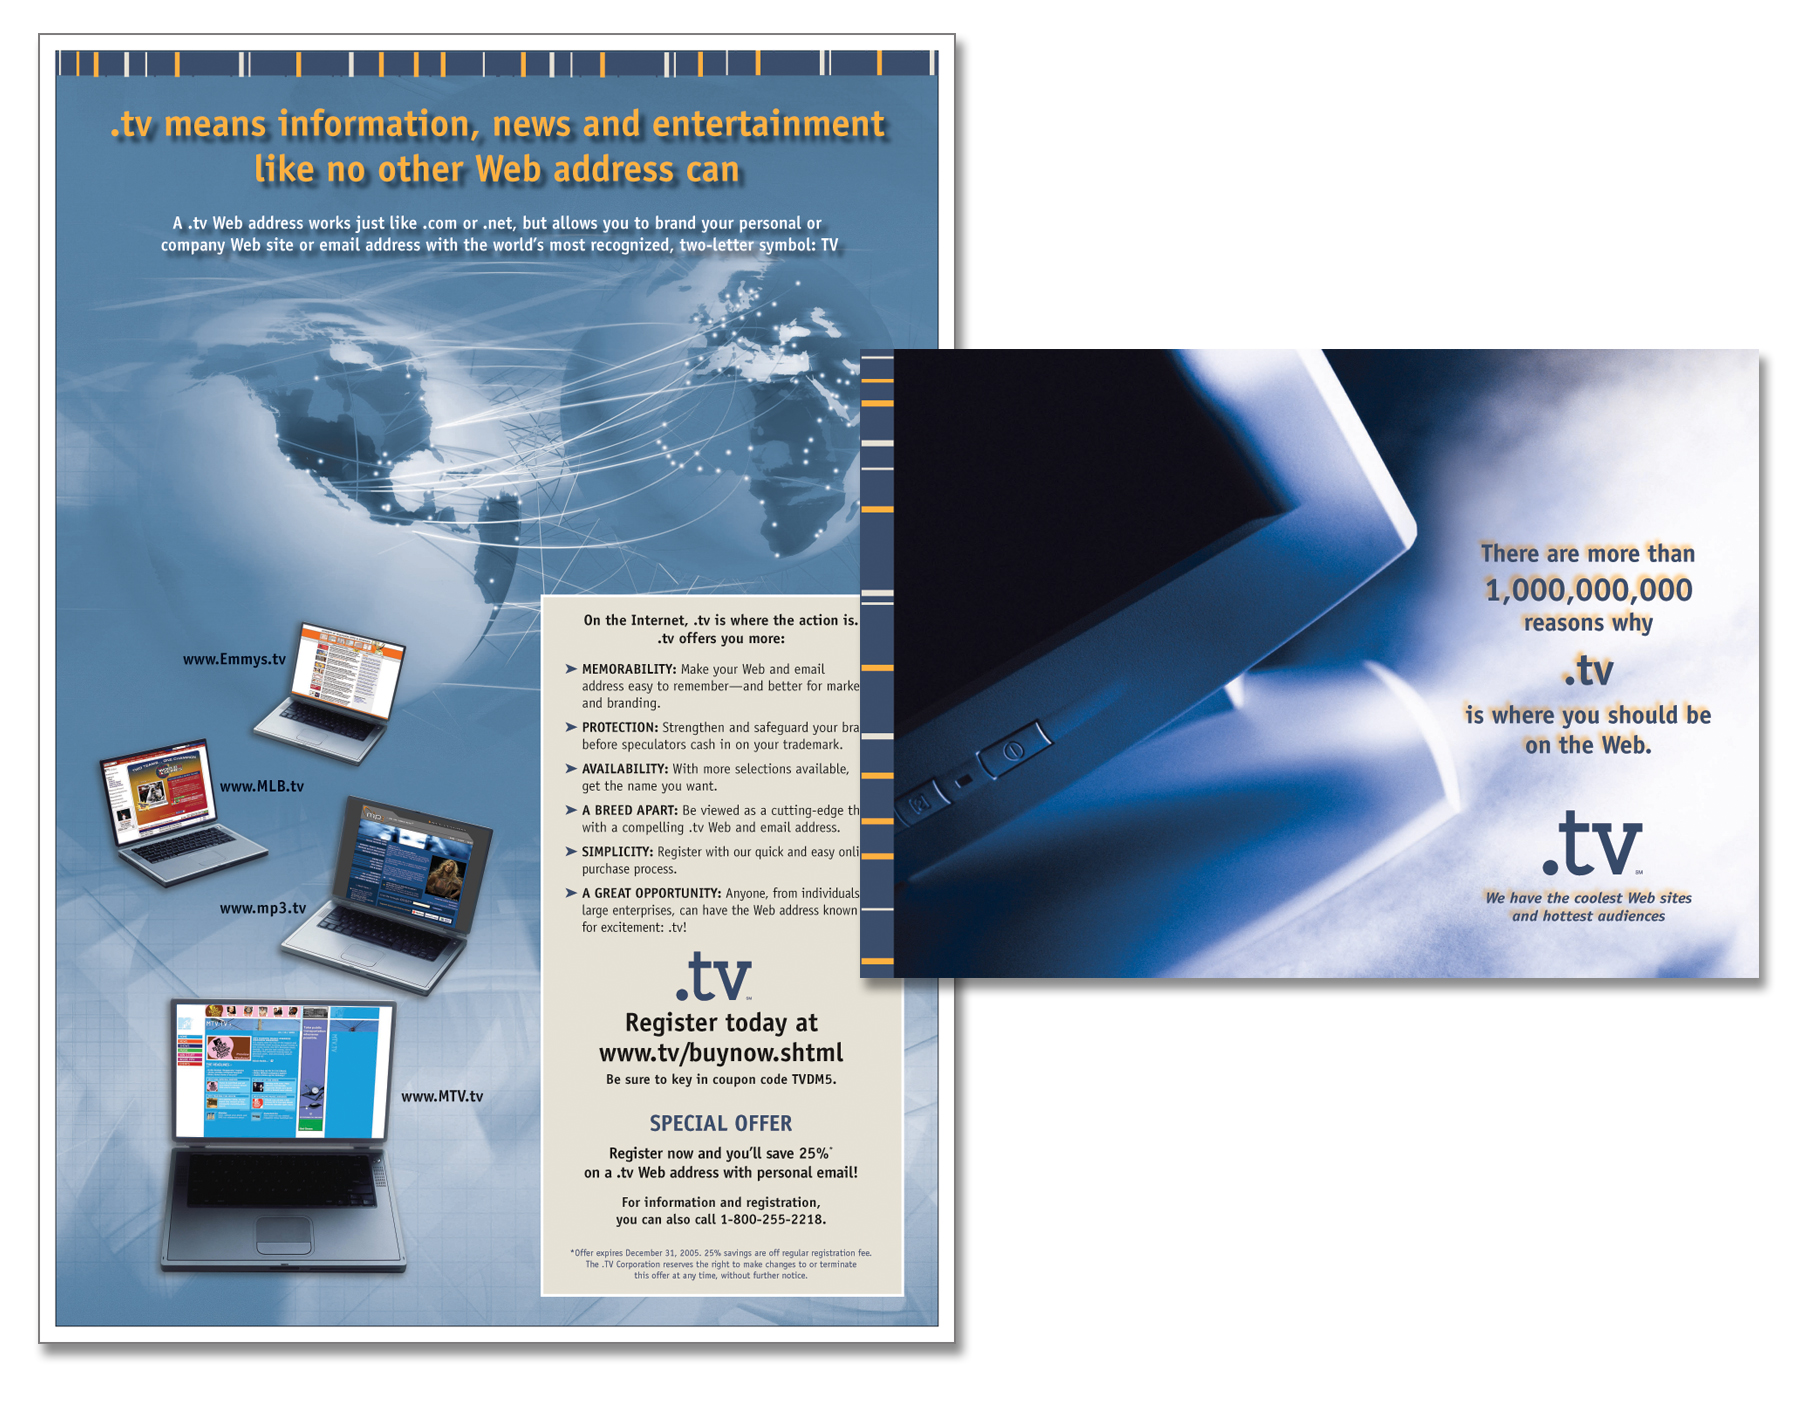 .TV “Where You Should Be On The Web” Direct Mail